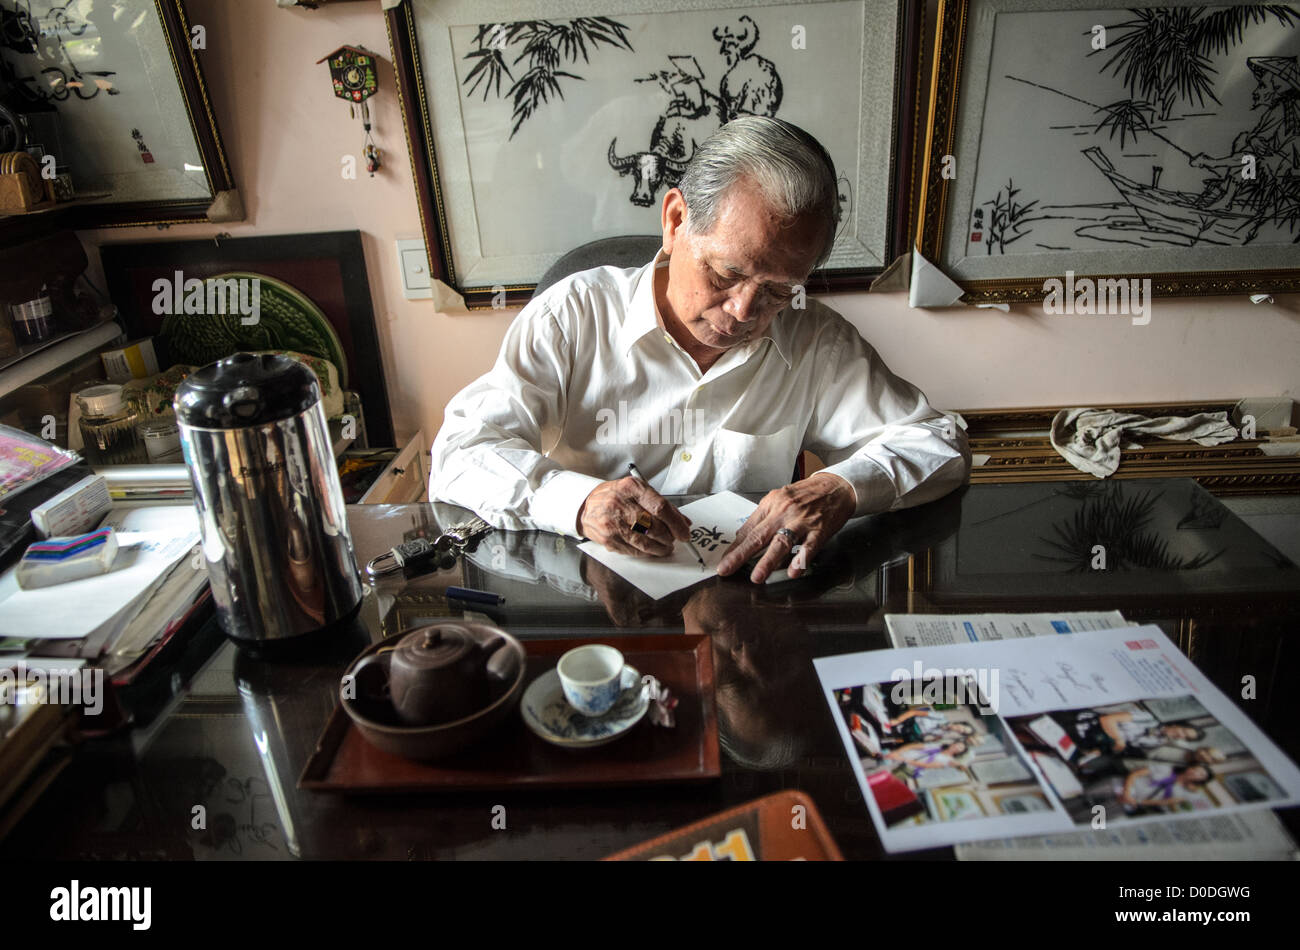 HUE, Vietnam - Local artisan Kinh Van Le, a master of traditional Hue silk embroidery, writes at his desk on his store in Hue, Vietnam. Some of his work hangs on the wall in the background. Stock Photo